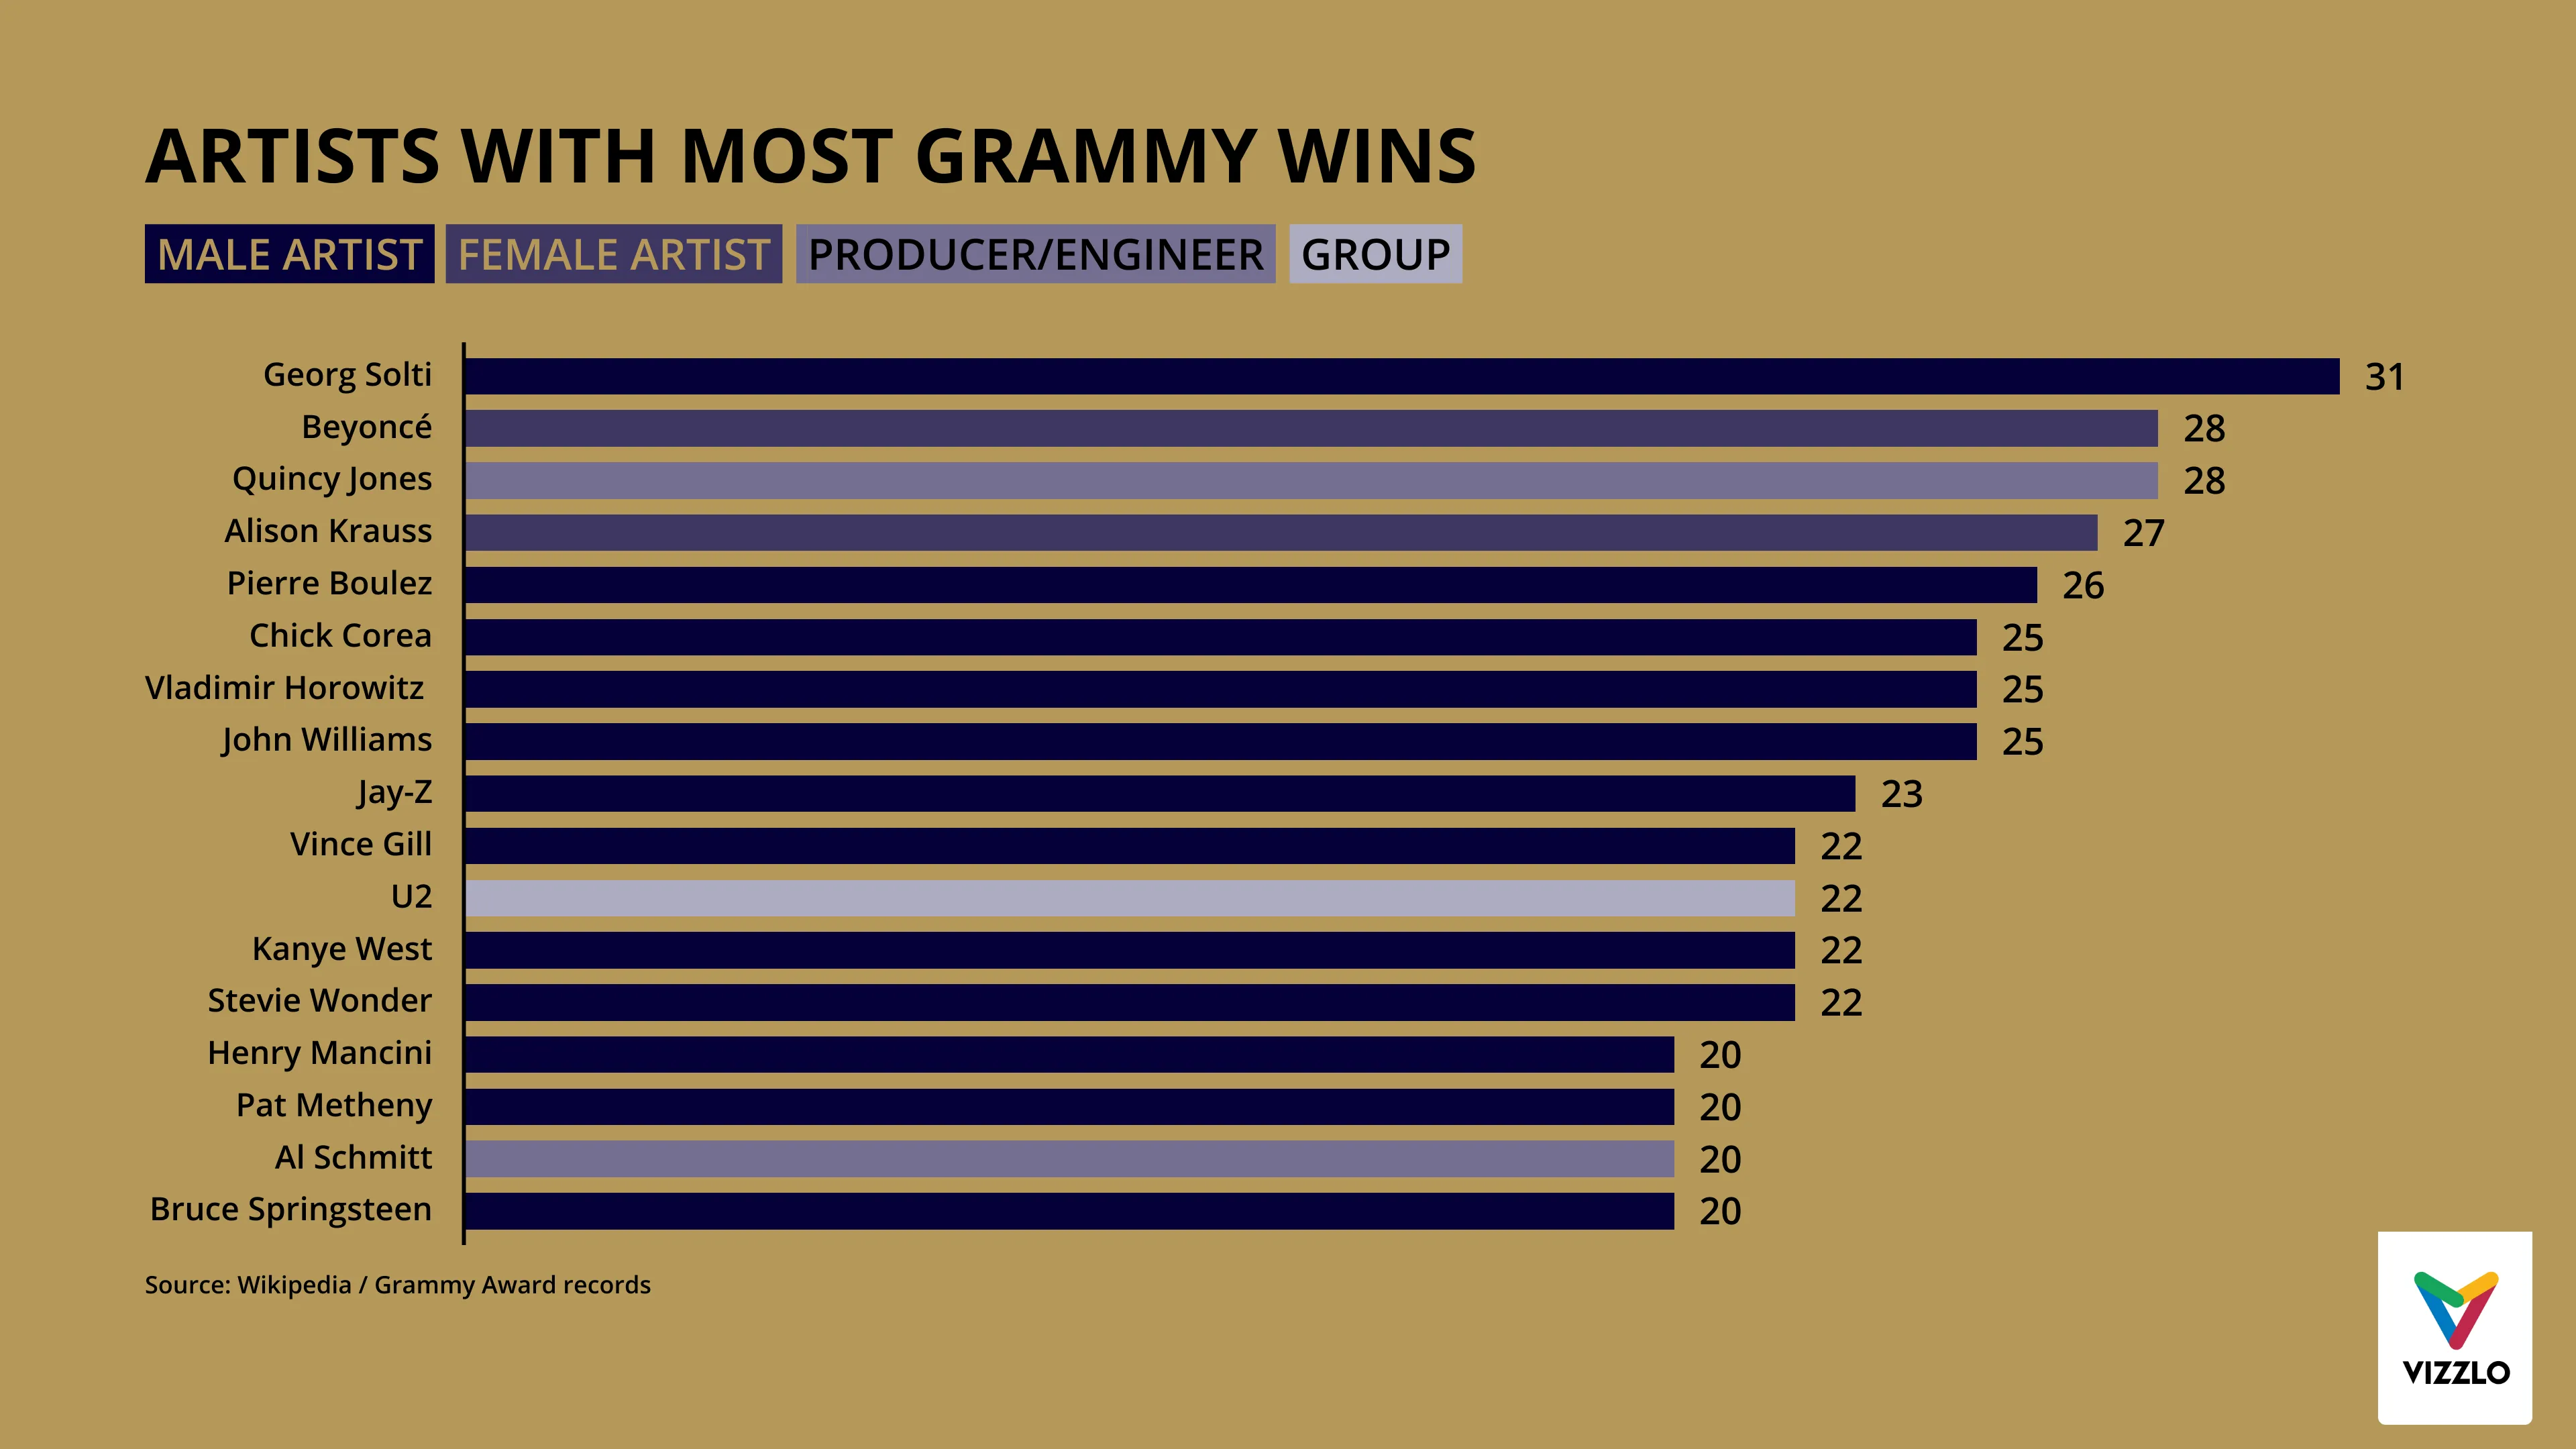 ARTISTS WITH MOST GRAMMY WINS